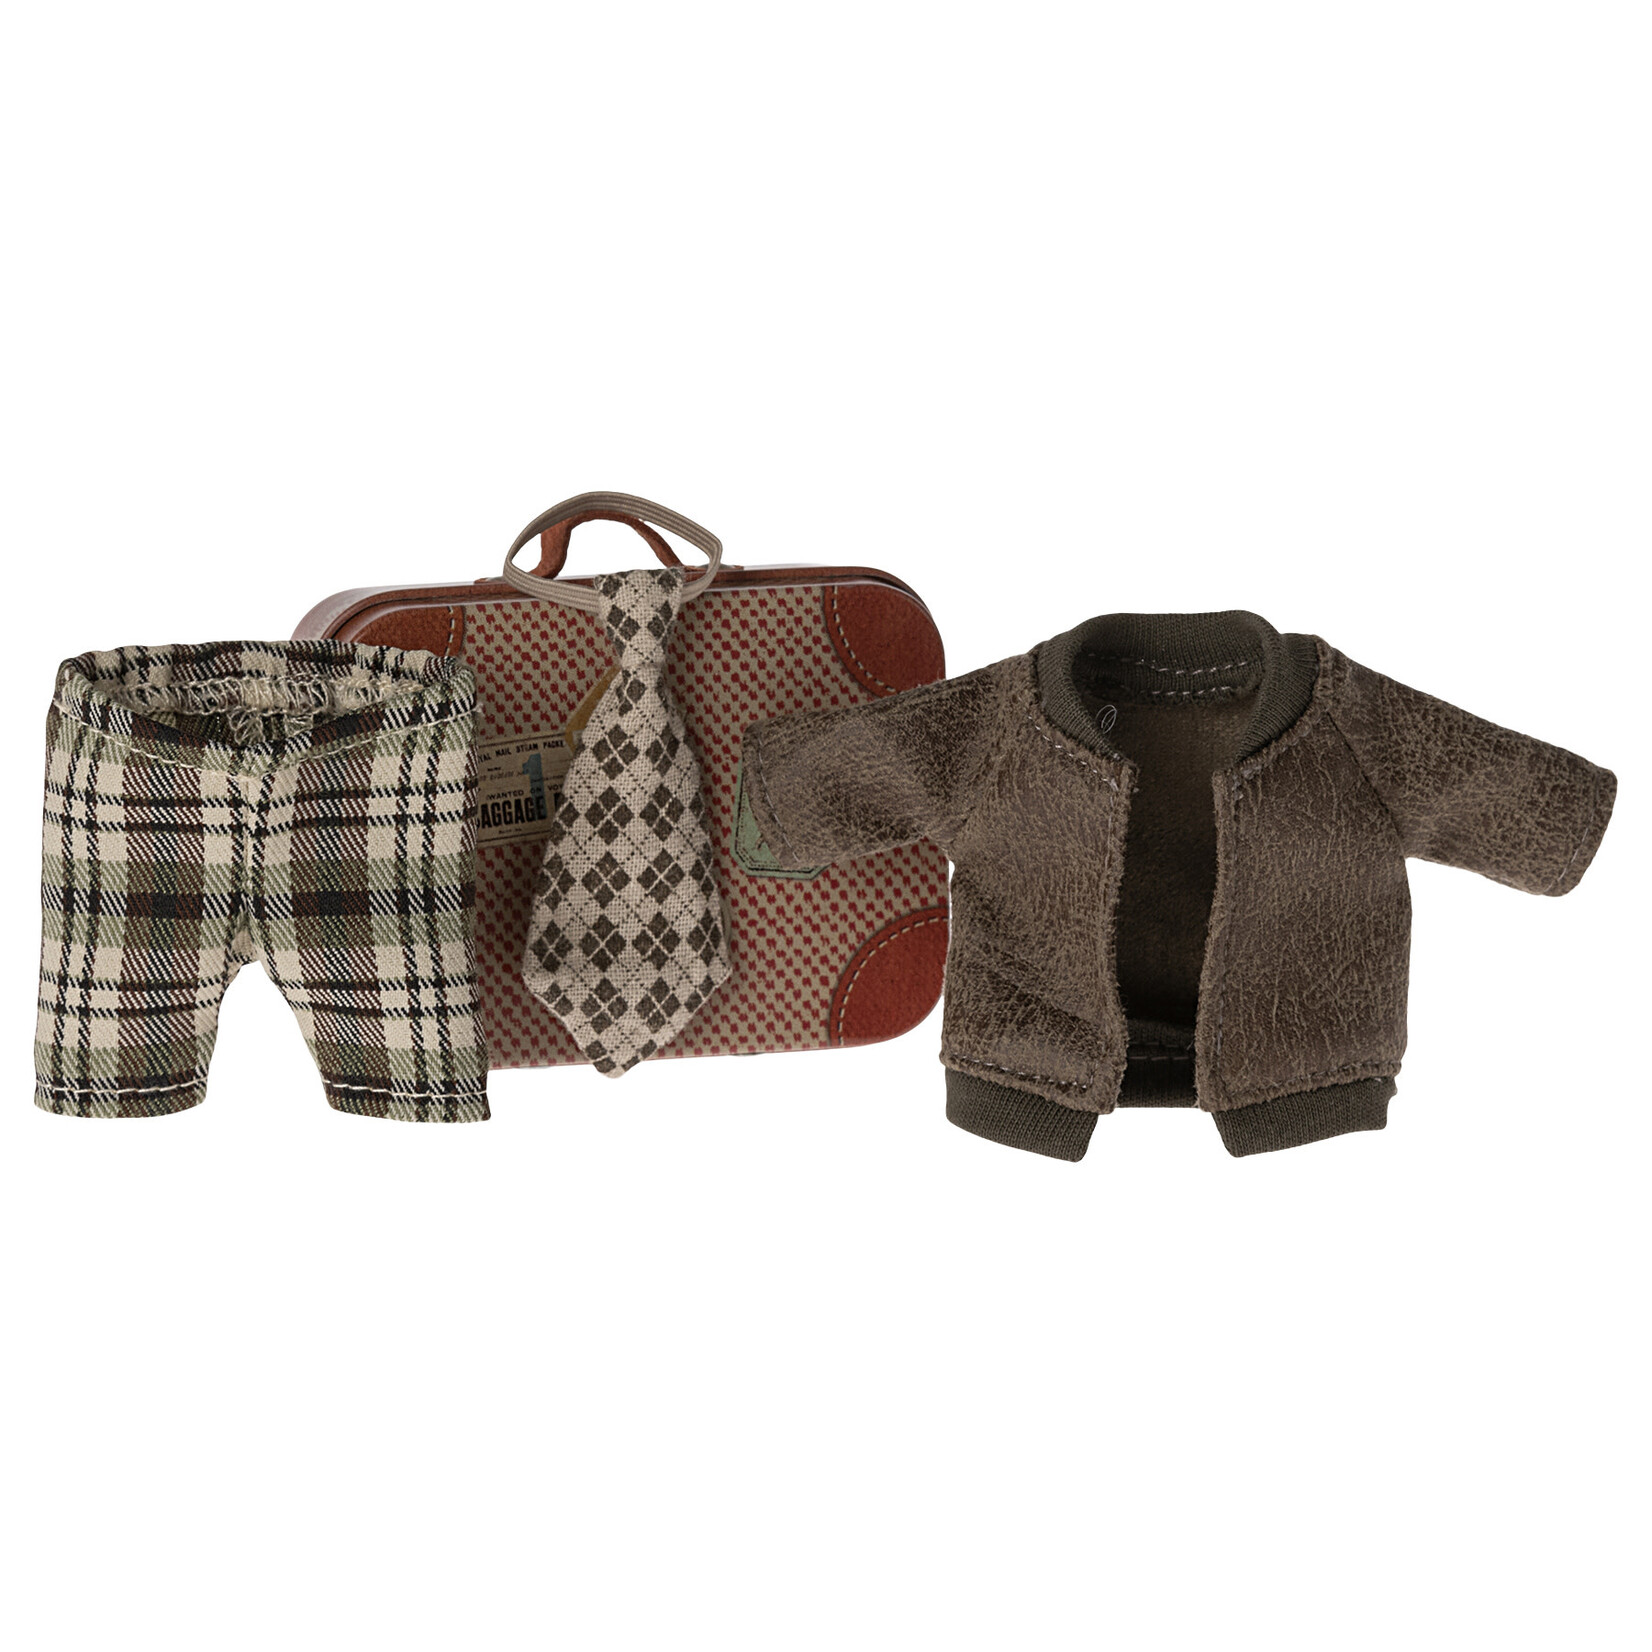 Maileg PRE ORDER Maileg Jacket Pants and tie CLOTHES in suitcase for Grandpa mouse - Estimated arrival mid/end May